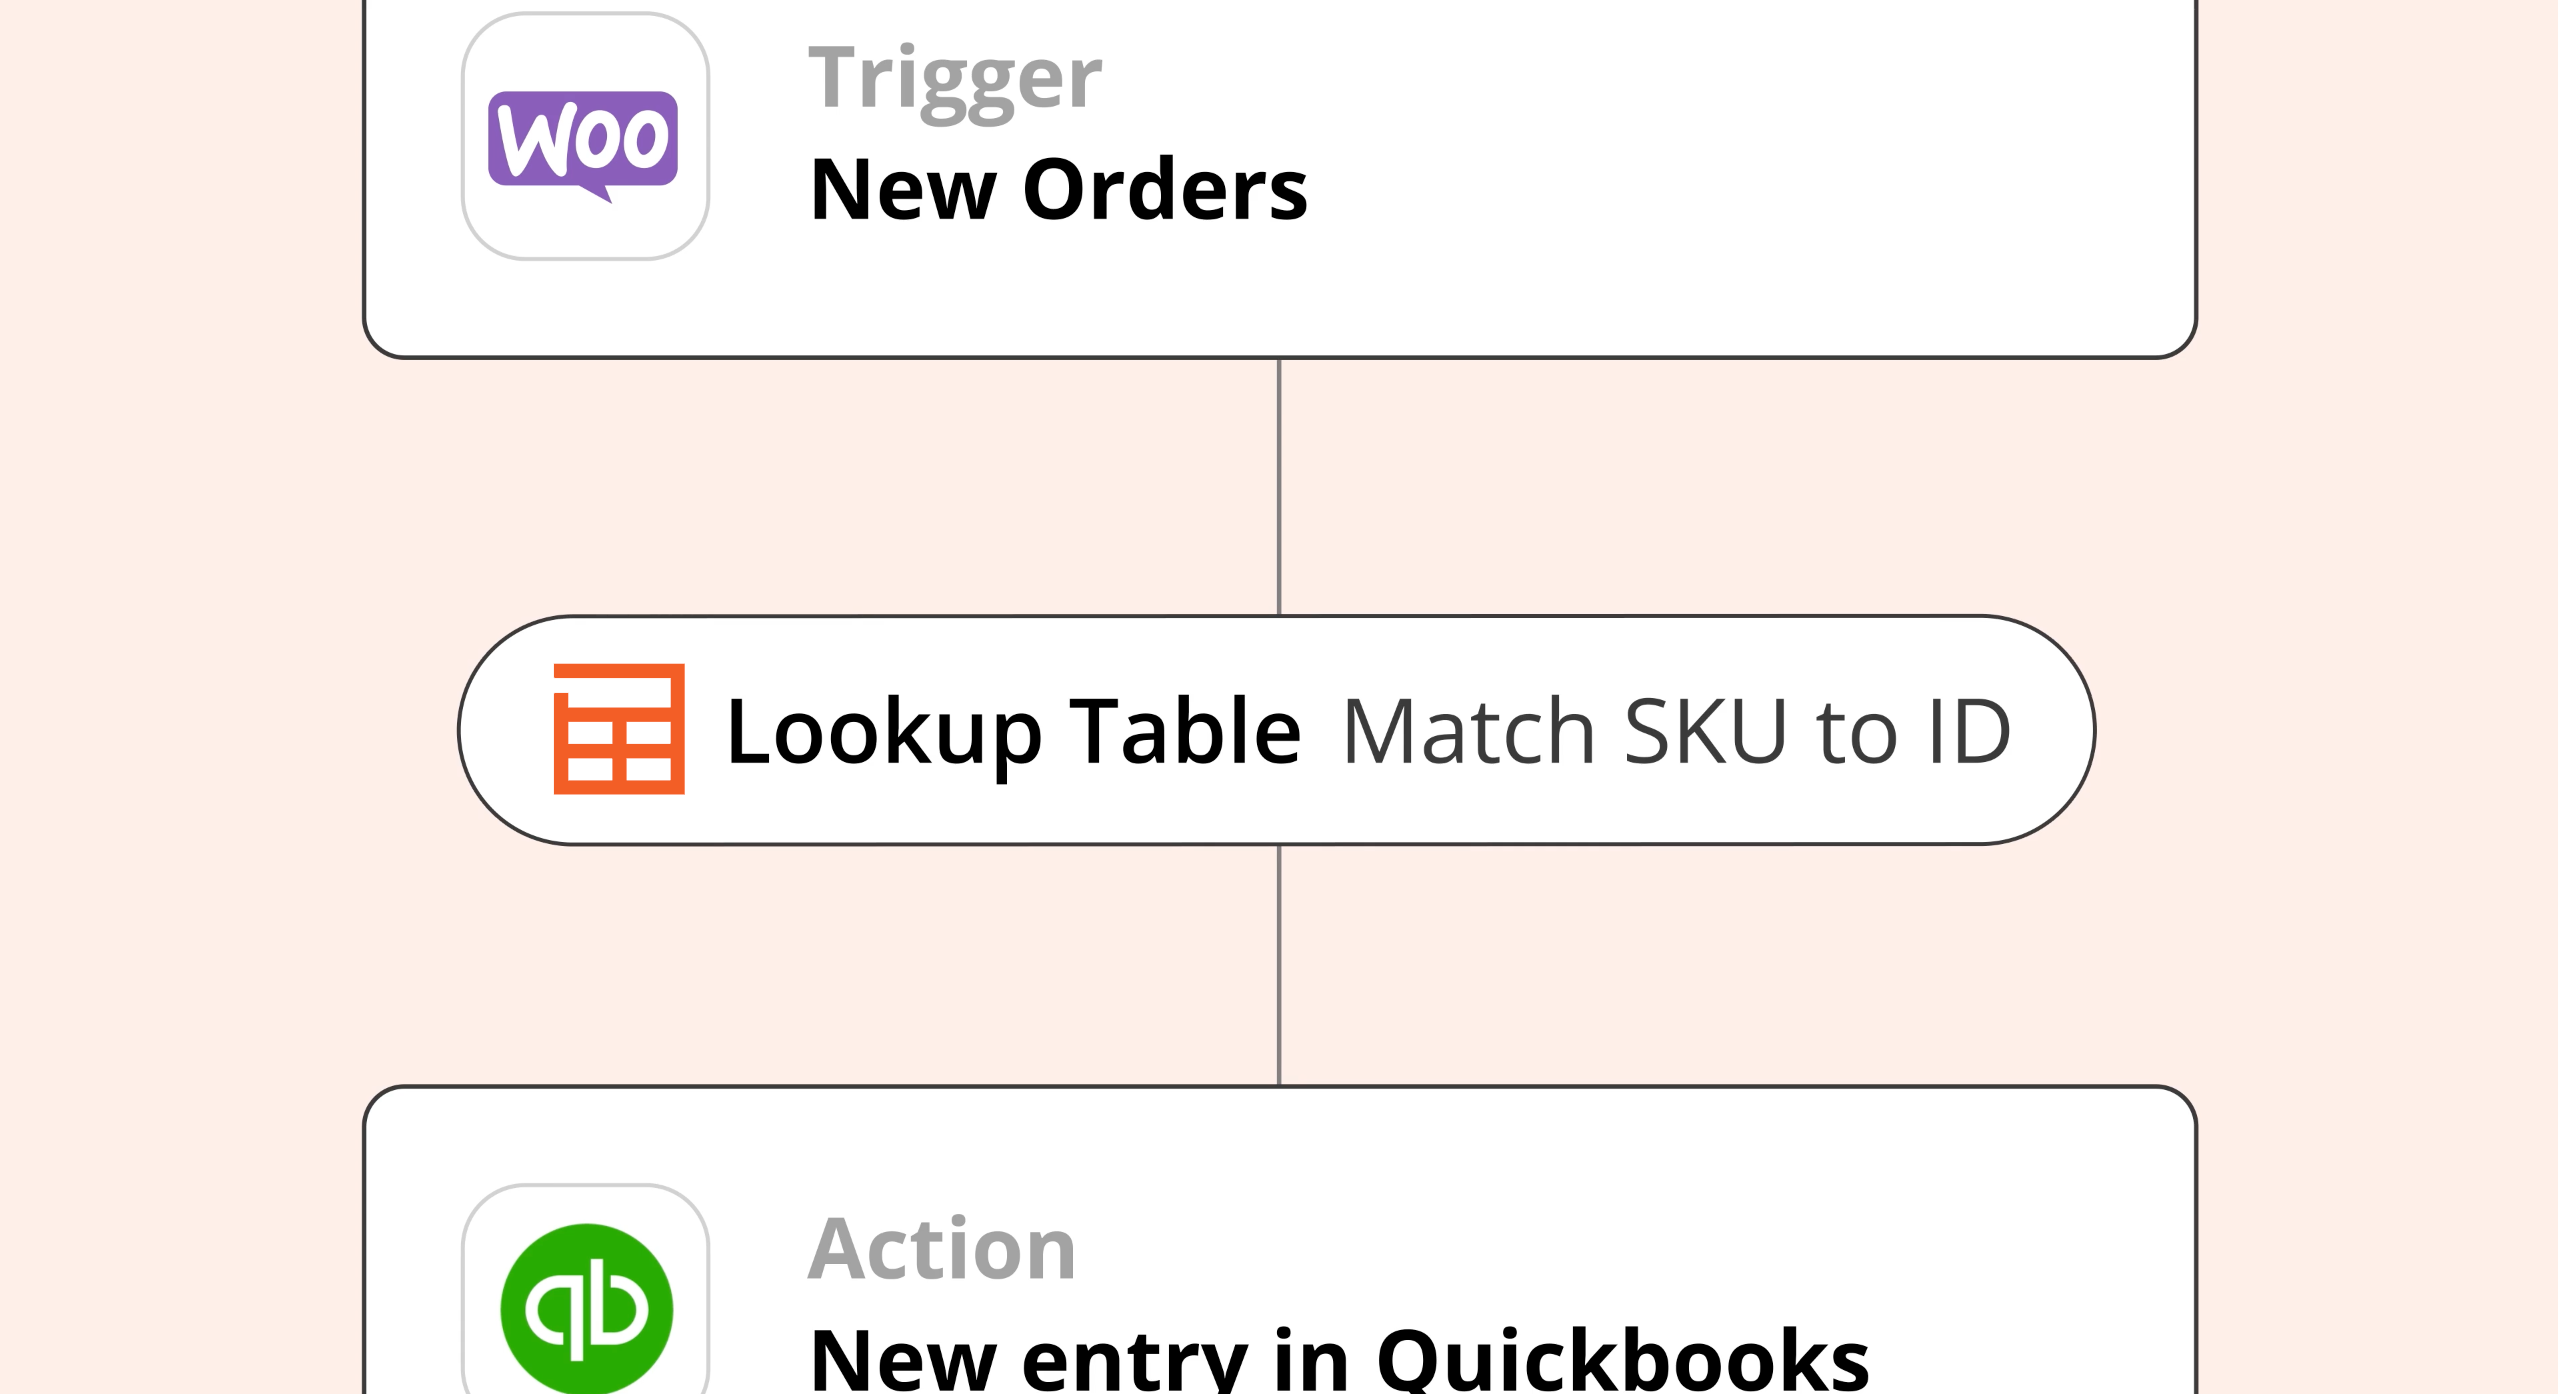 Lookup Table for WooCommerce and Quickbooks